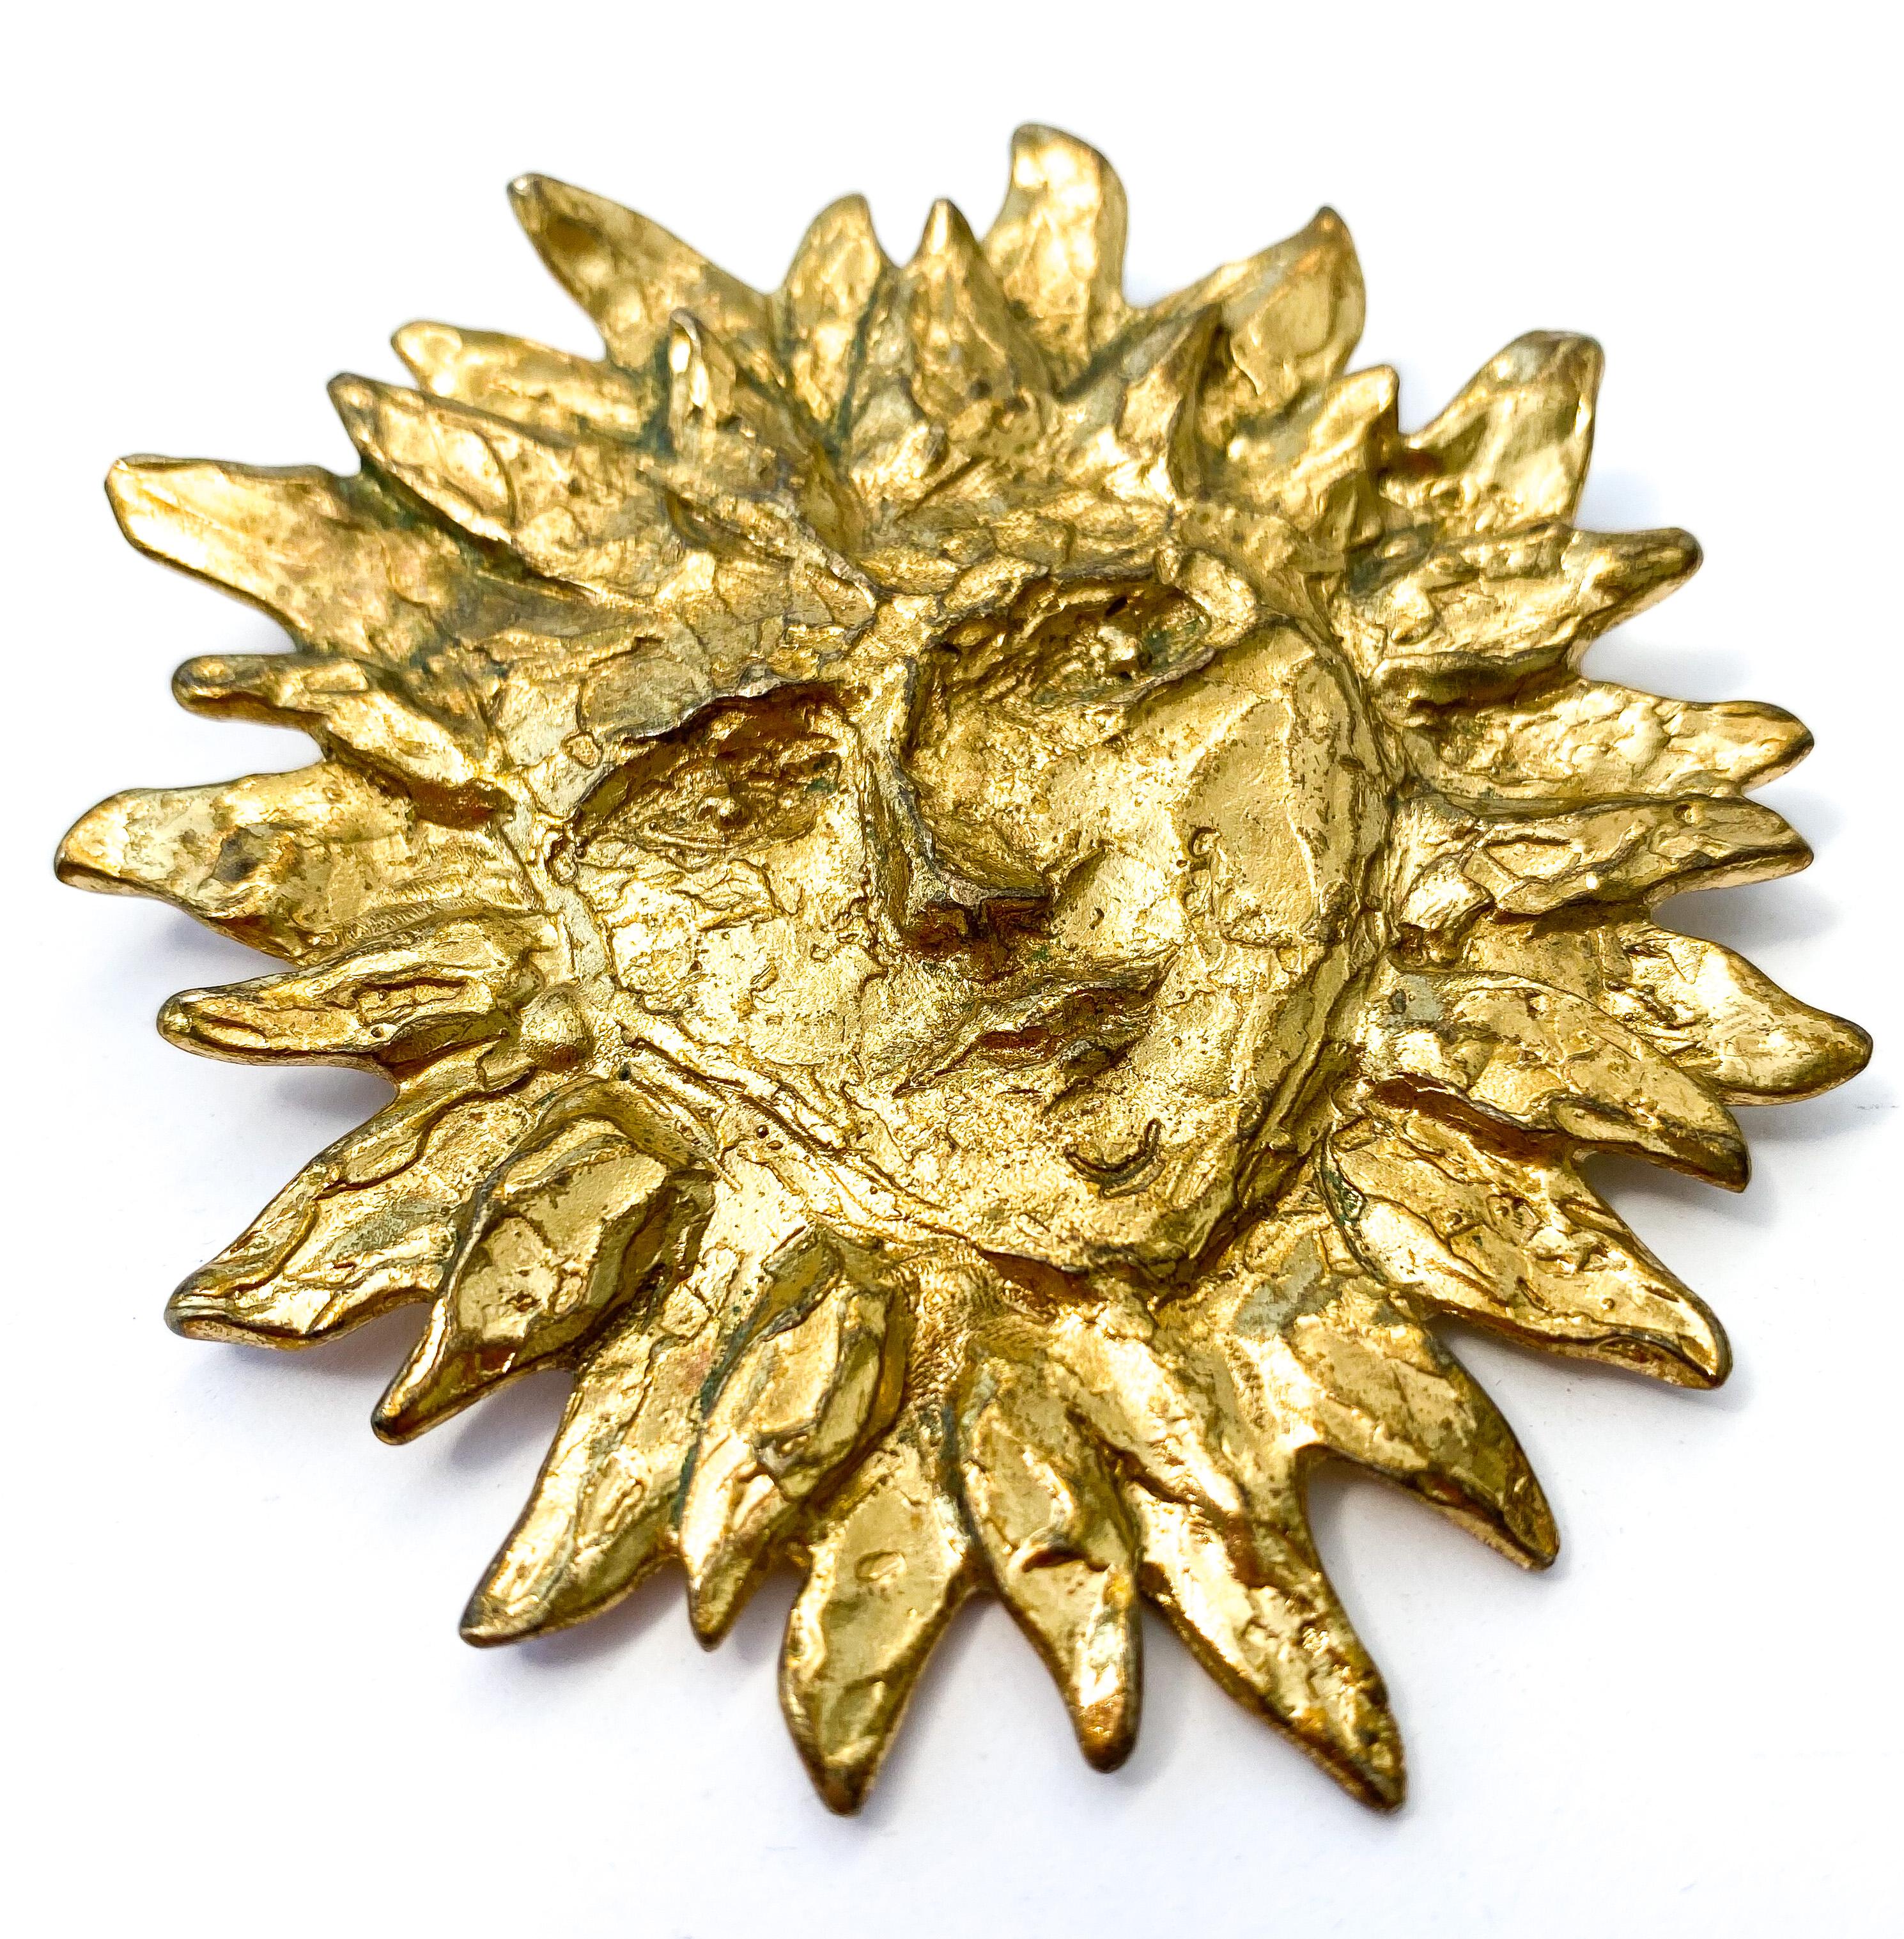 An iconic brooch from Yves Saint Laurent in the 1980s, a familiar and popular design justifiably so. Hand carved then cast in gilded metal by Maison Goossens for YSL, designed by Loulou De La Falaise, Yves Saint Laurent's muse and jewellery designer